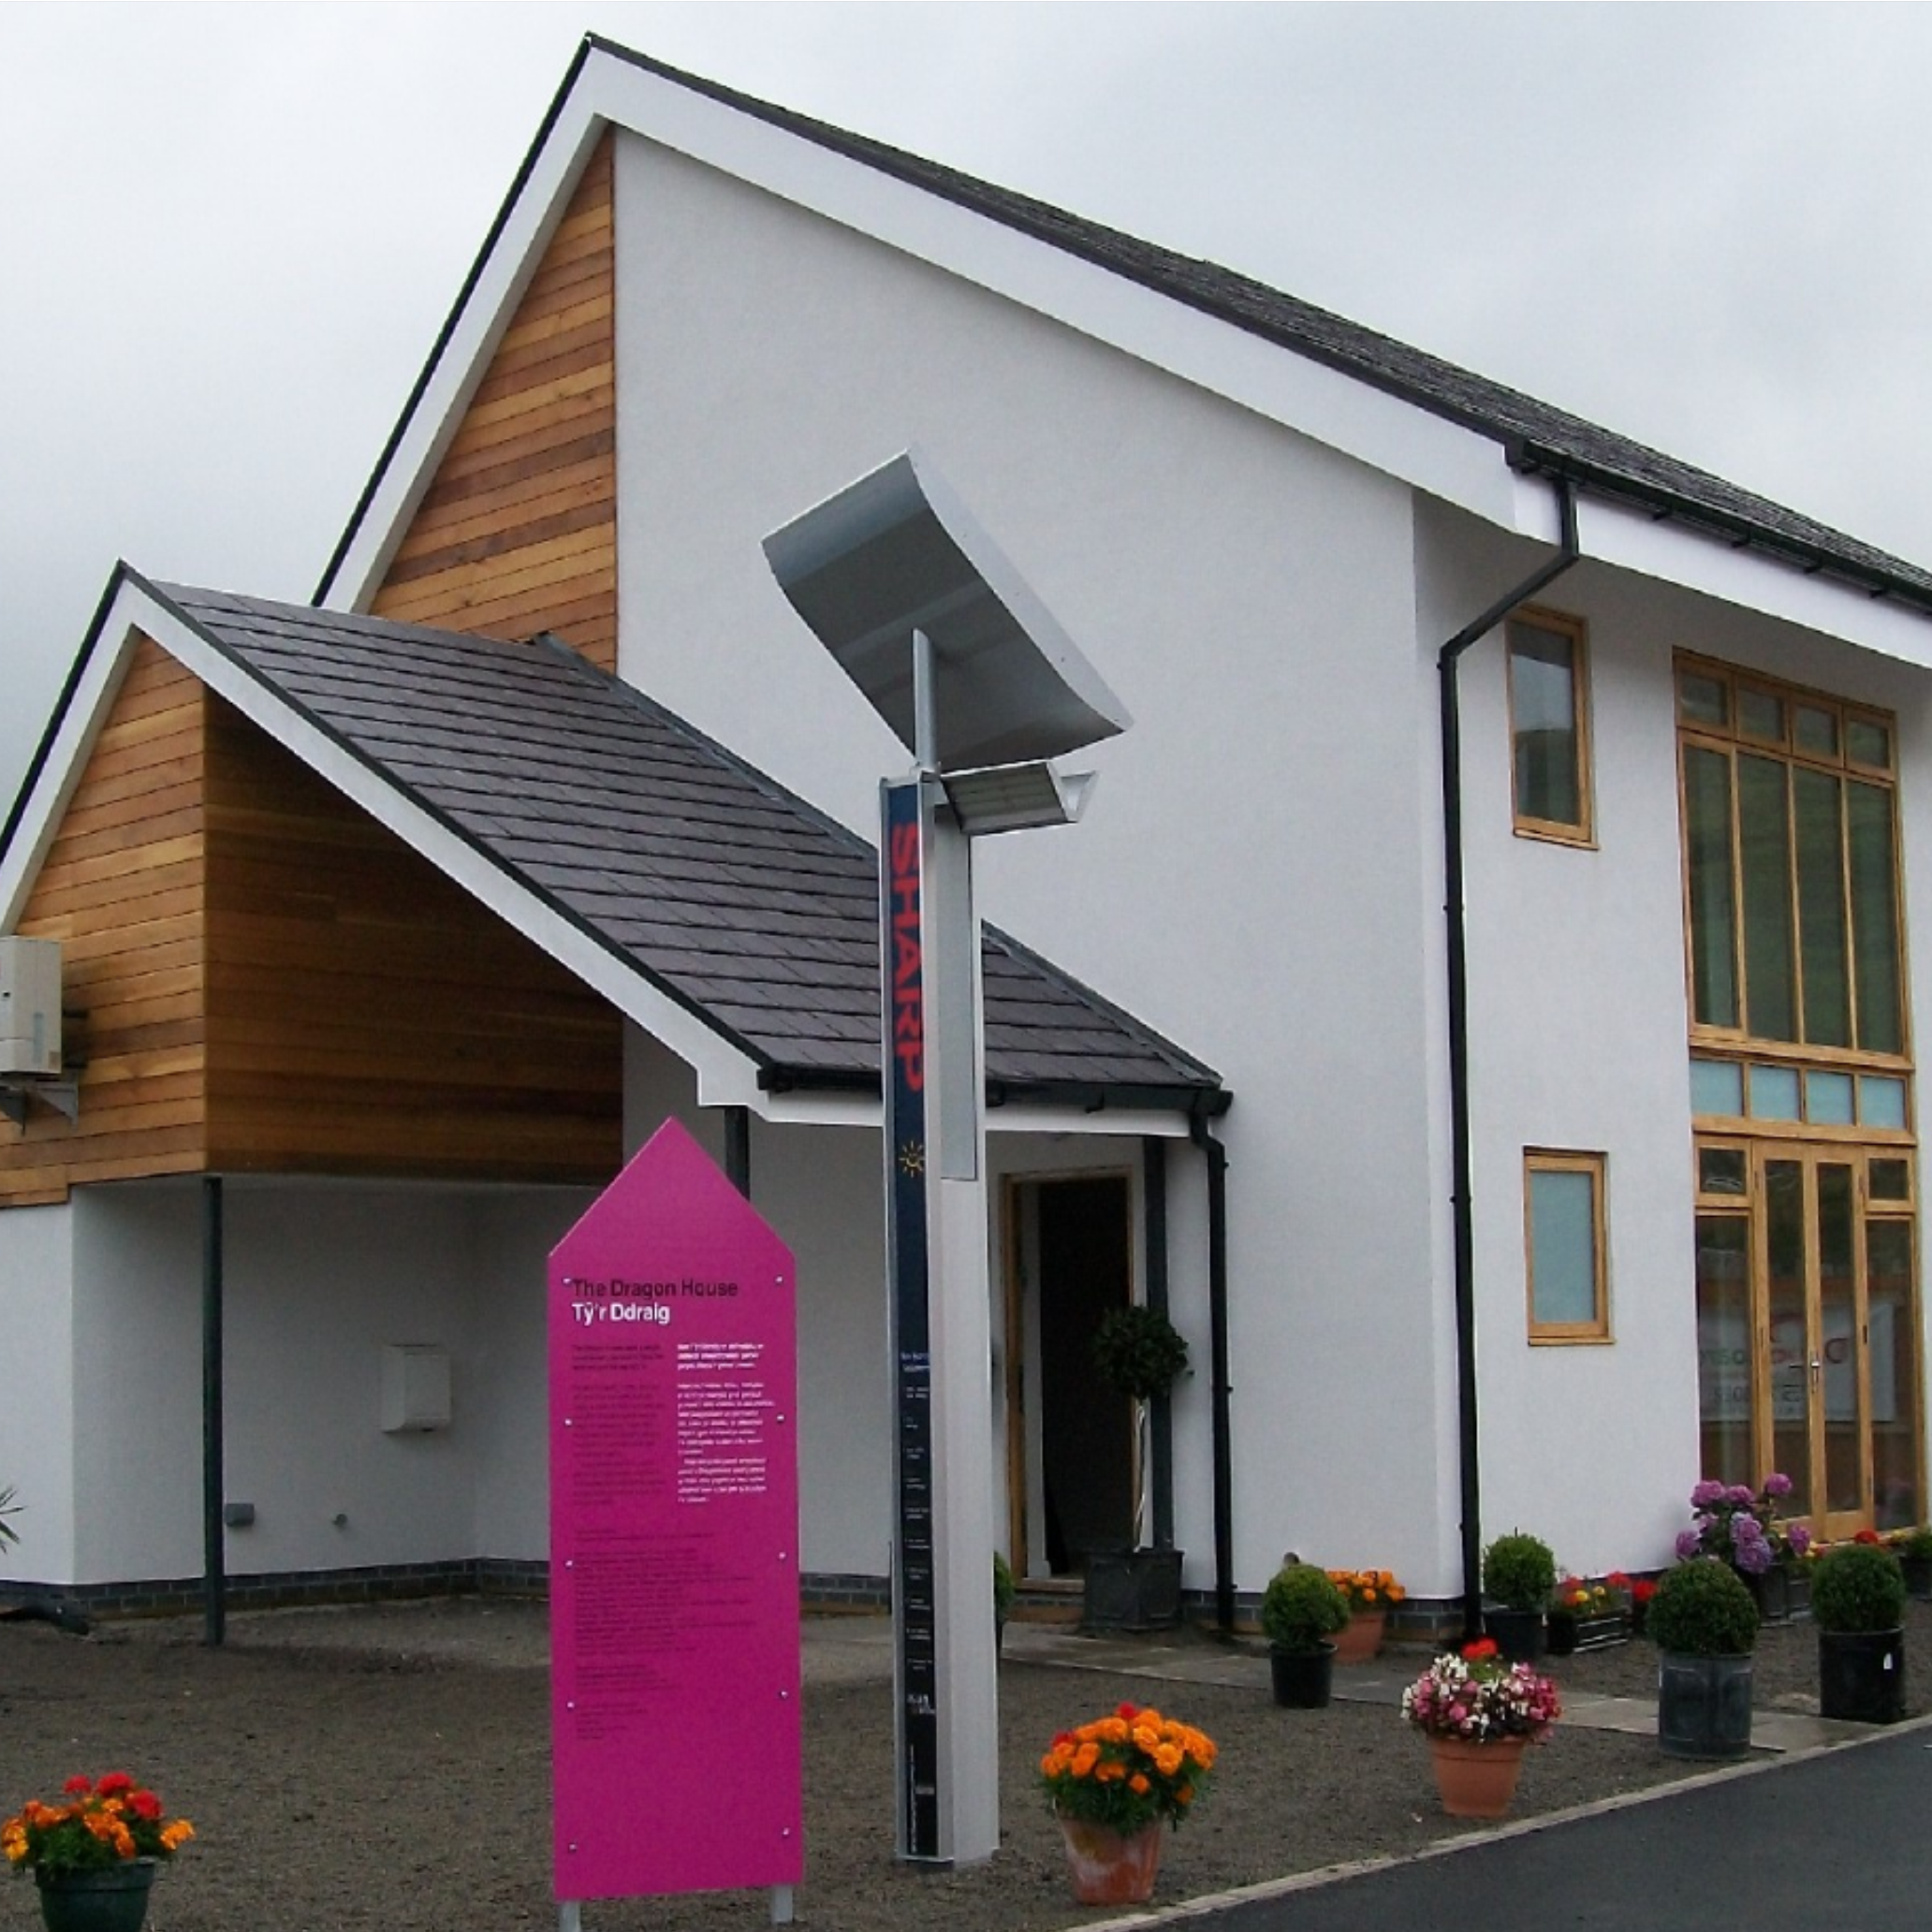 4 – Finished Passive House – Wales